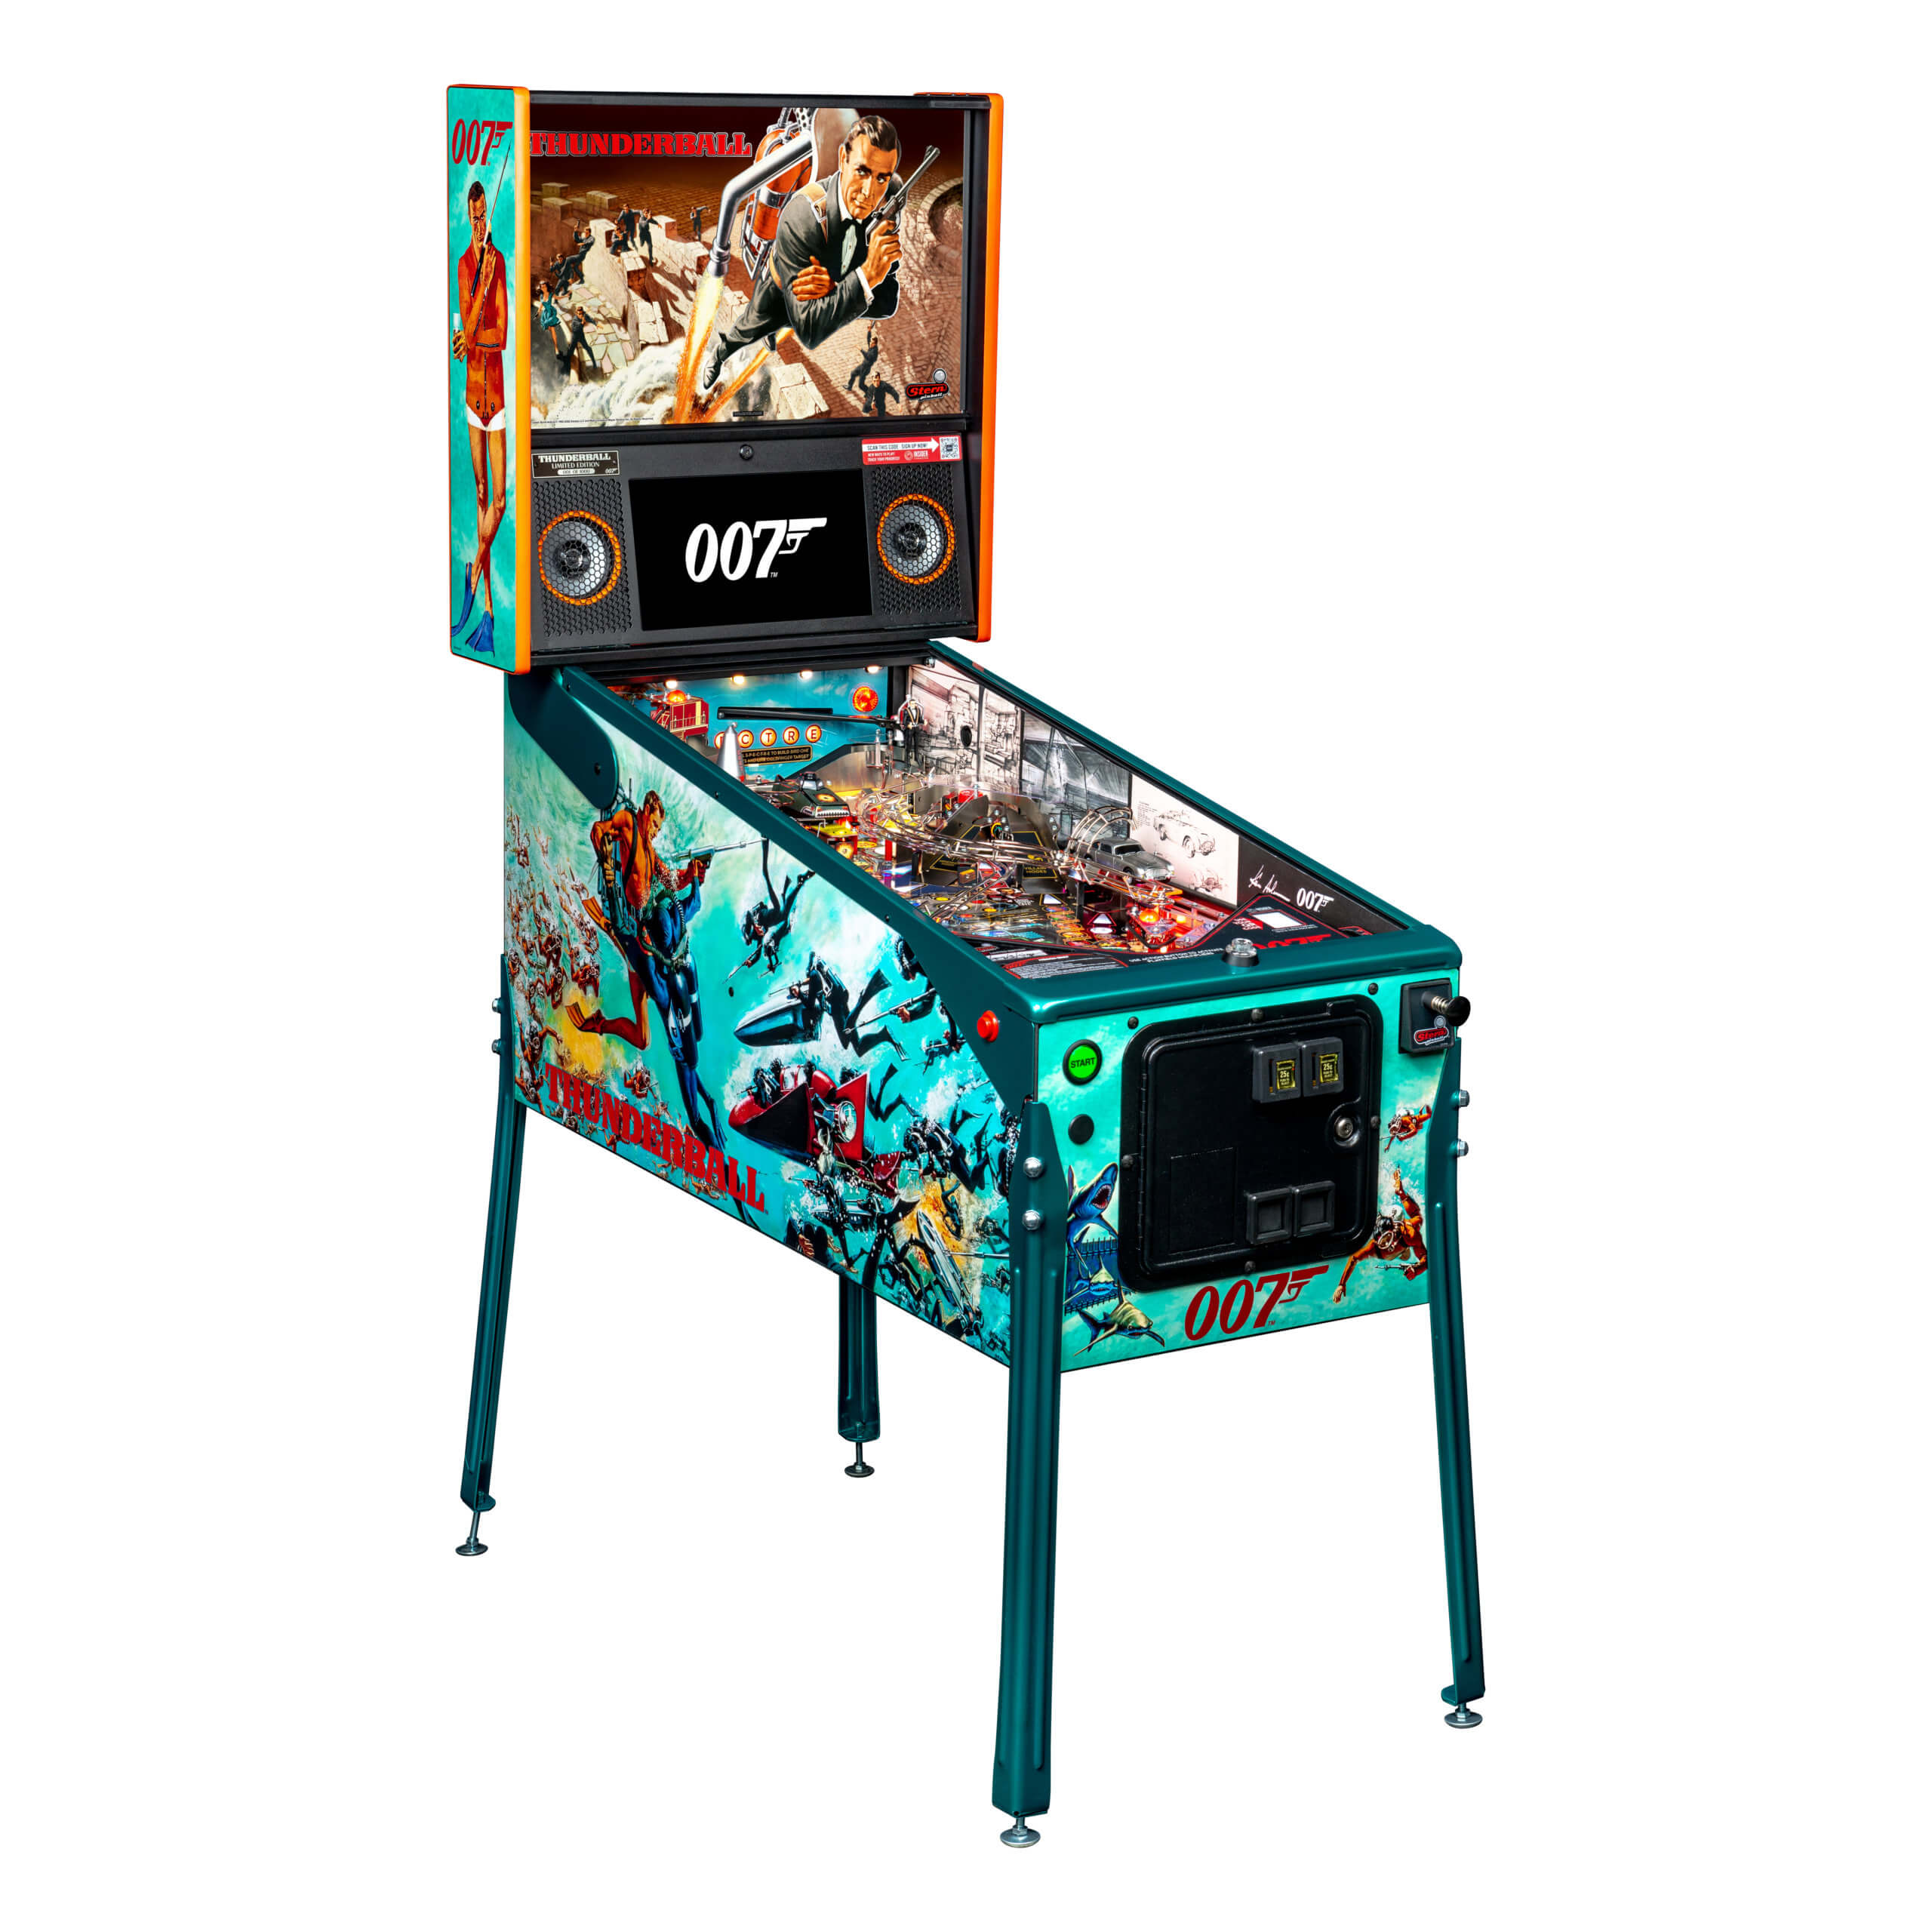 Buy James Bond 007 Limited Edition Pinball Machine by Stern Online at $14999